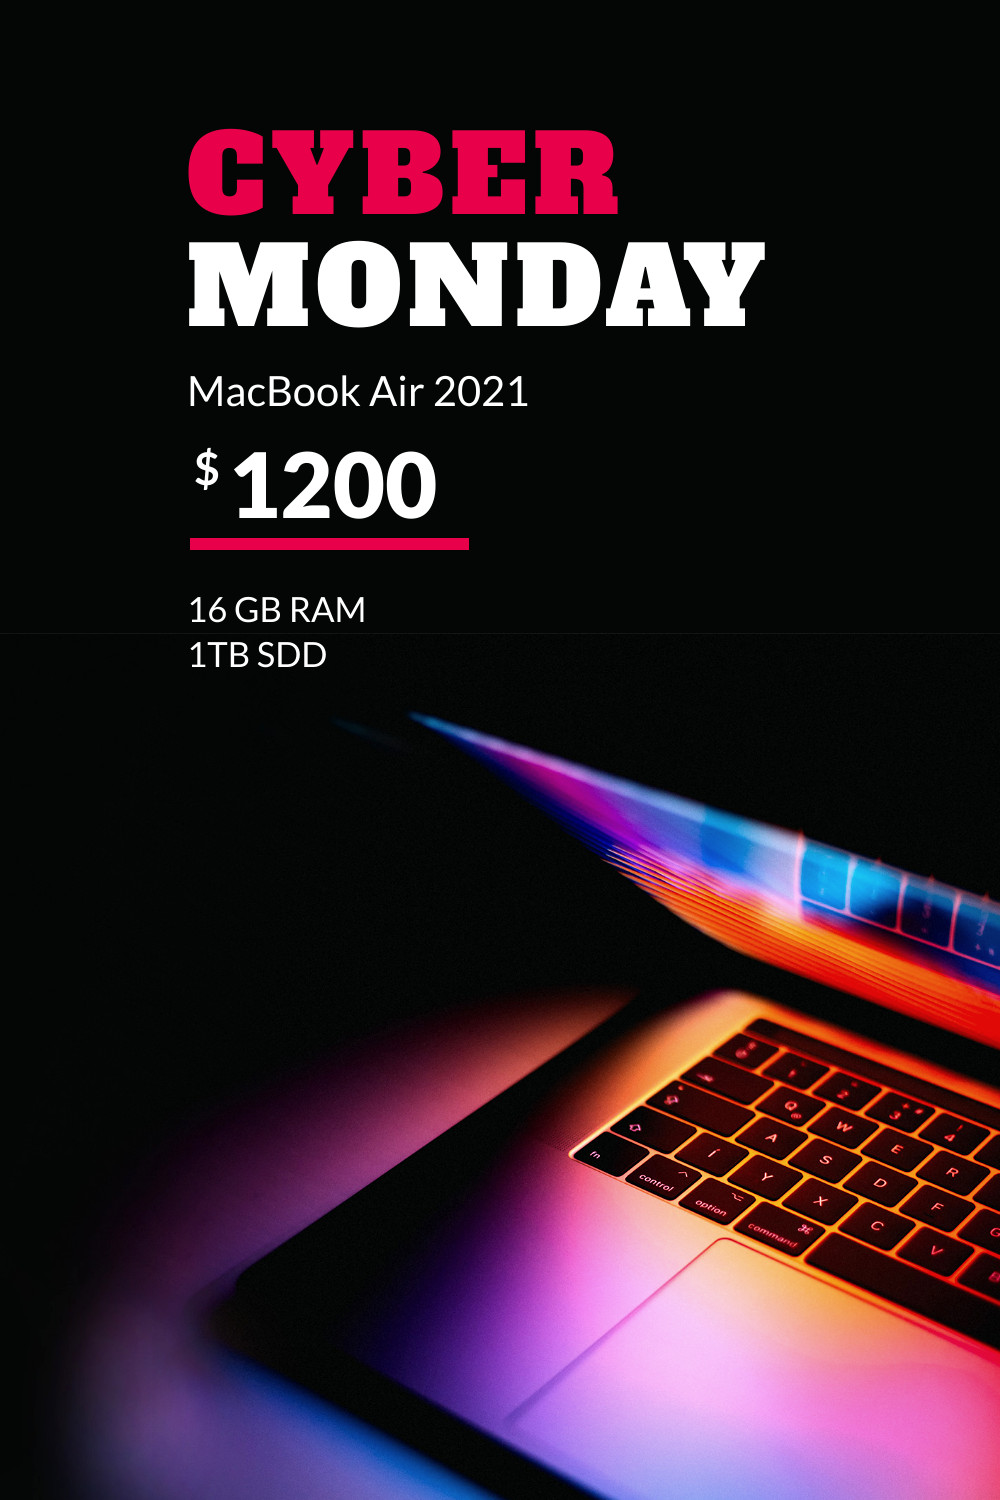 Cyber Monday Colorful MacBook Air Inline Rectangle 300x250